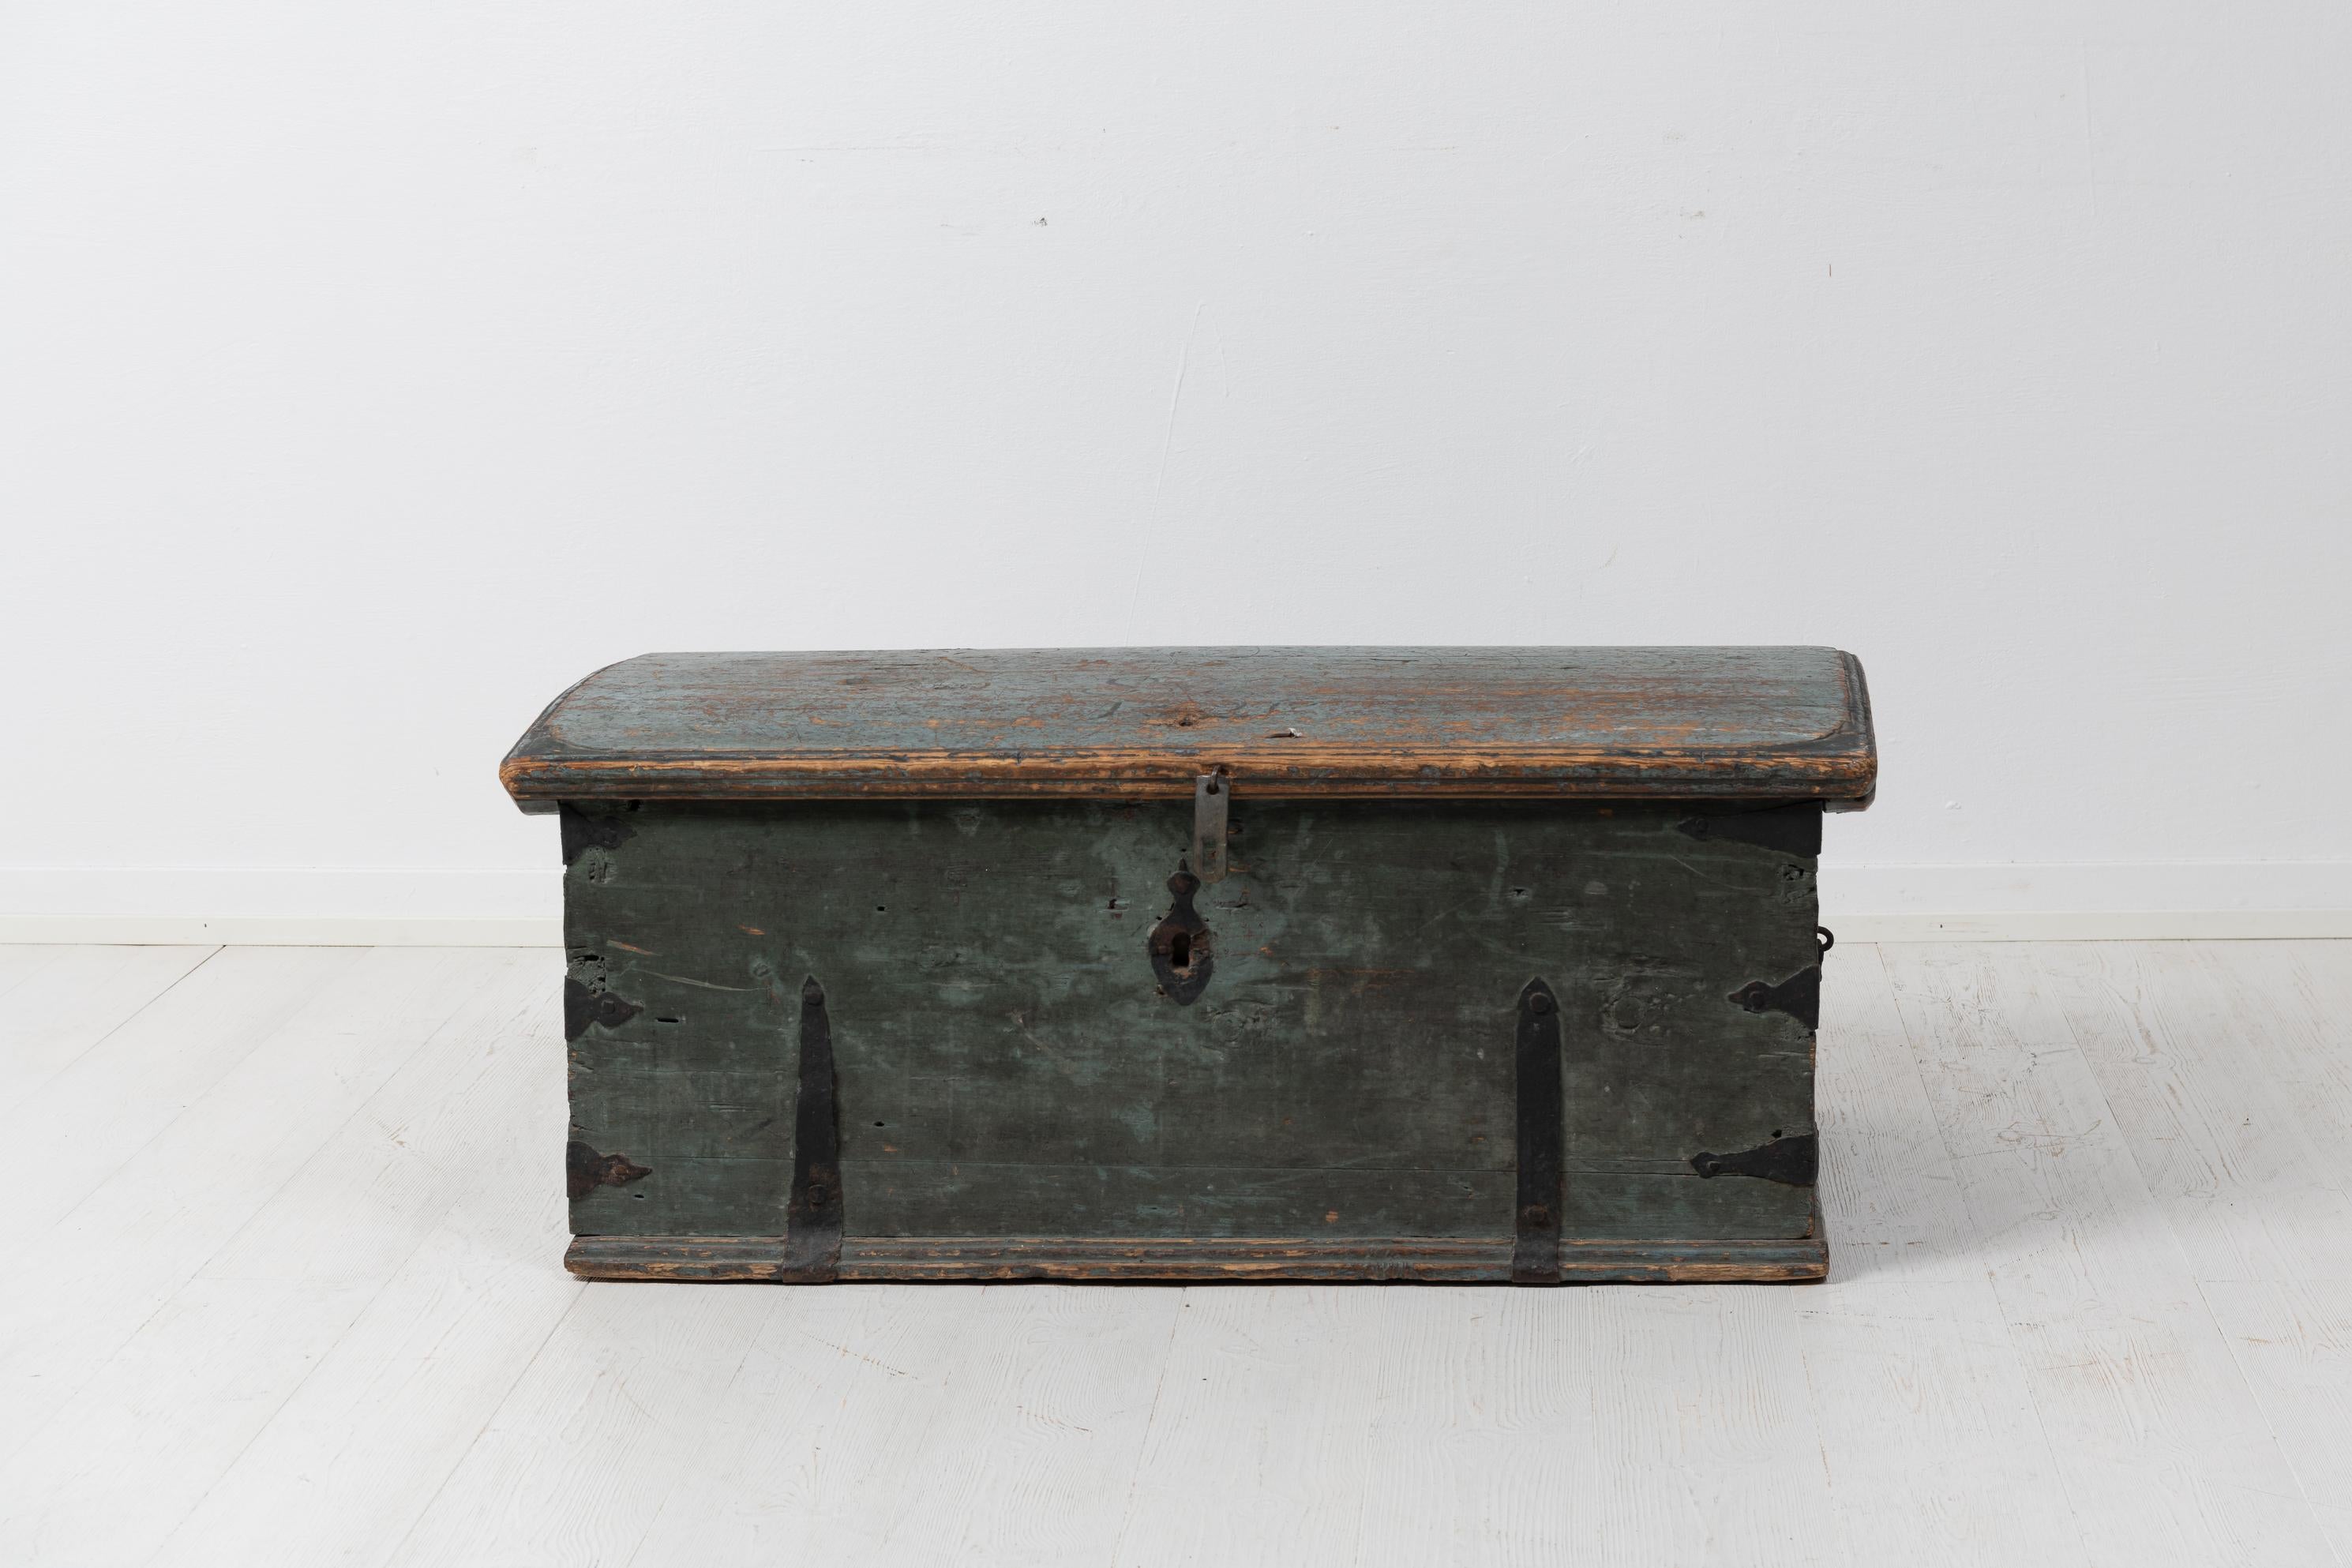 Antique northern Swedish chest in original condition. The chest is an attractive mid size where it’s large enough to be practical as well as stylish while not being too overwhelming. Made in solid pine with the first layer of original paint. The